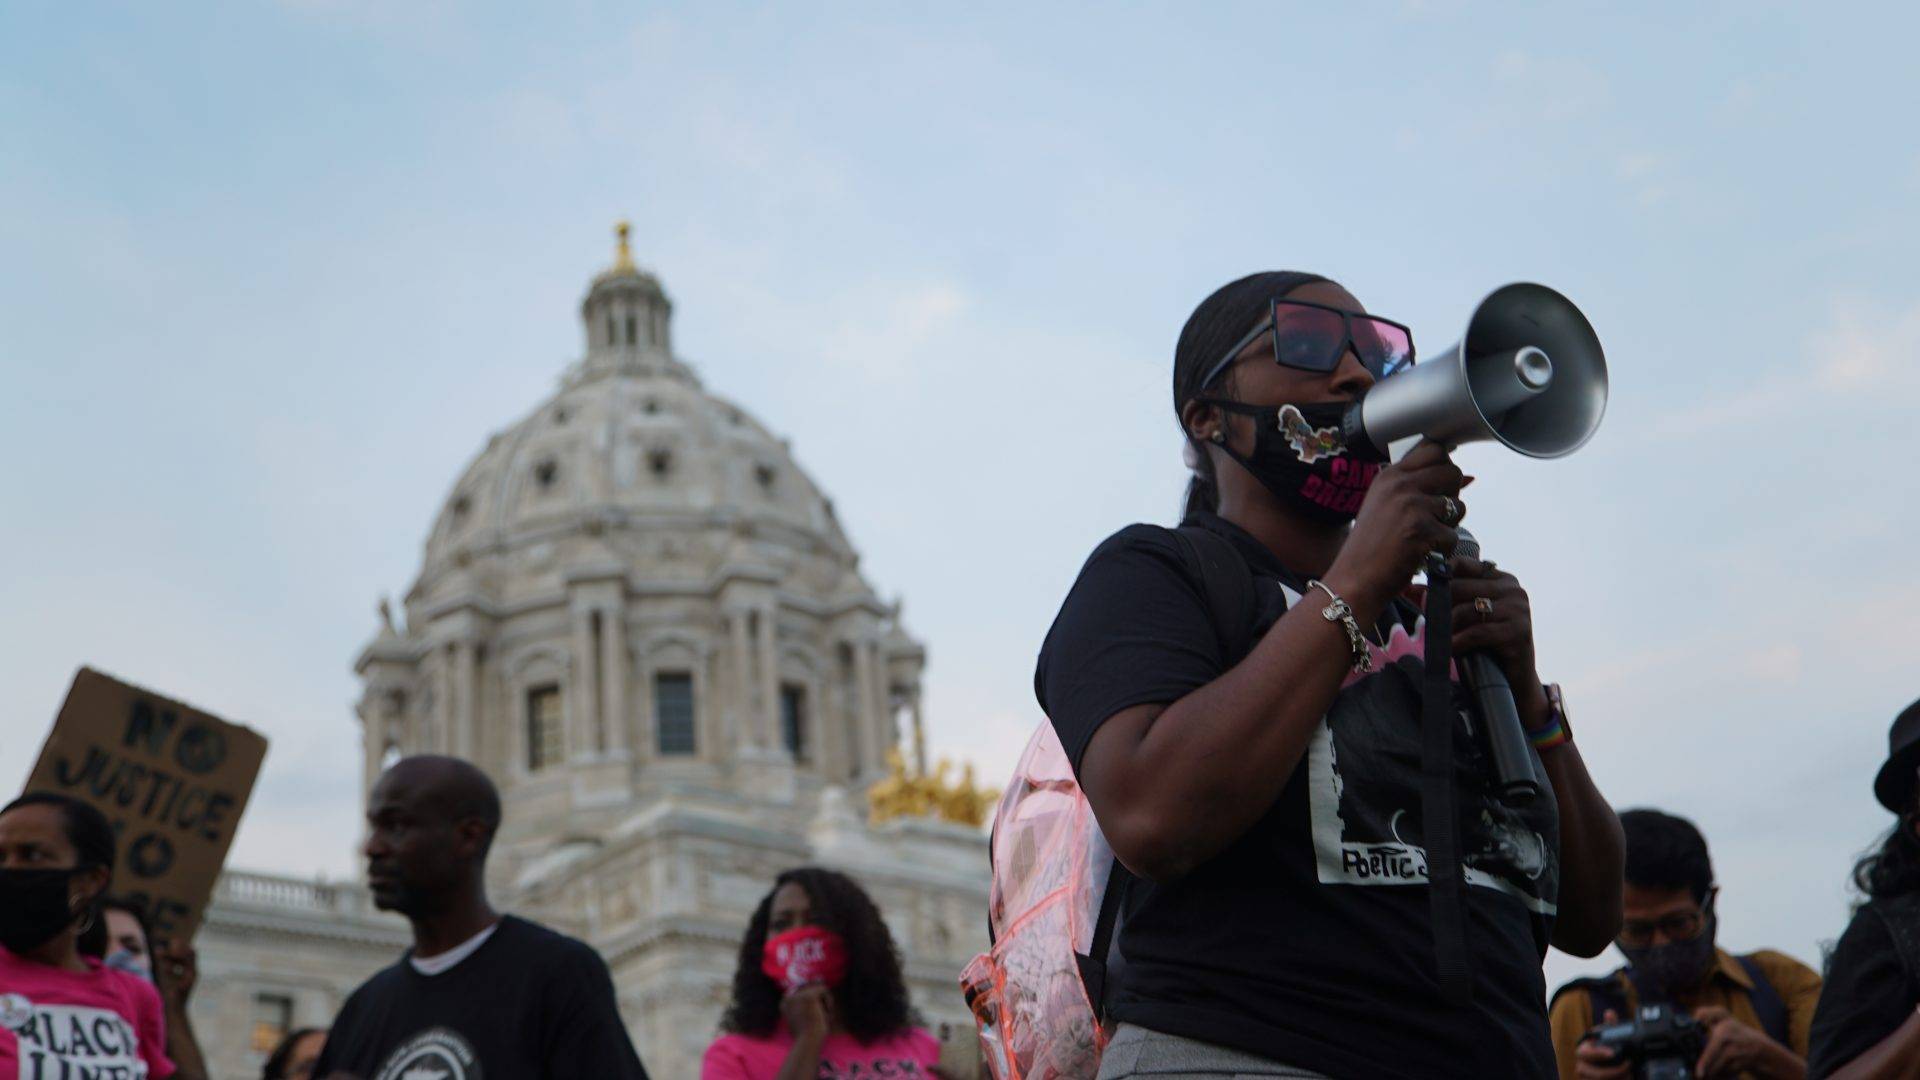 Diamond Reynolds, girlfriend of Philando Castille who was fatally shot by police in 2016, speaking at a rally in front of the Minnesota State Capitol for Breonna Taylor.